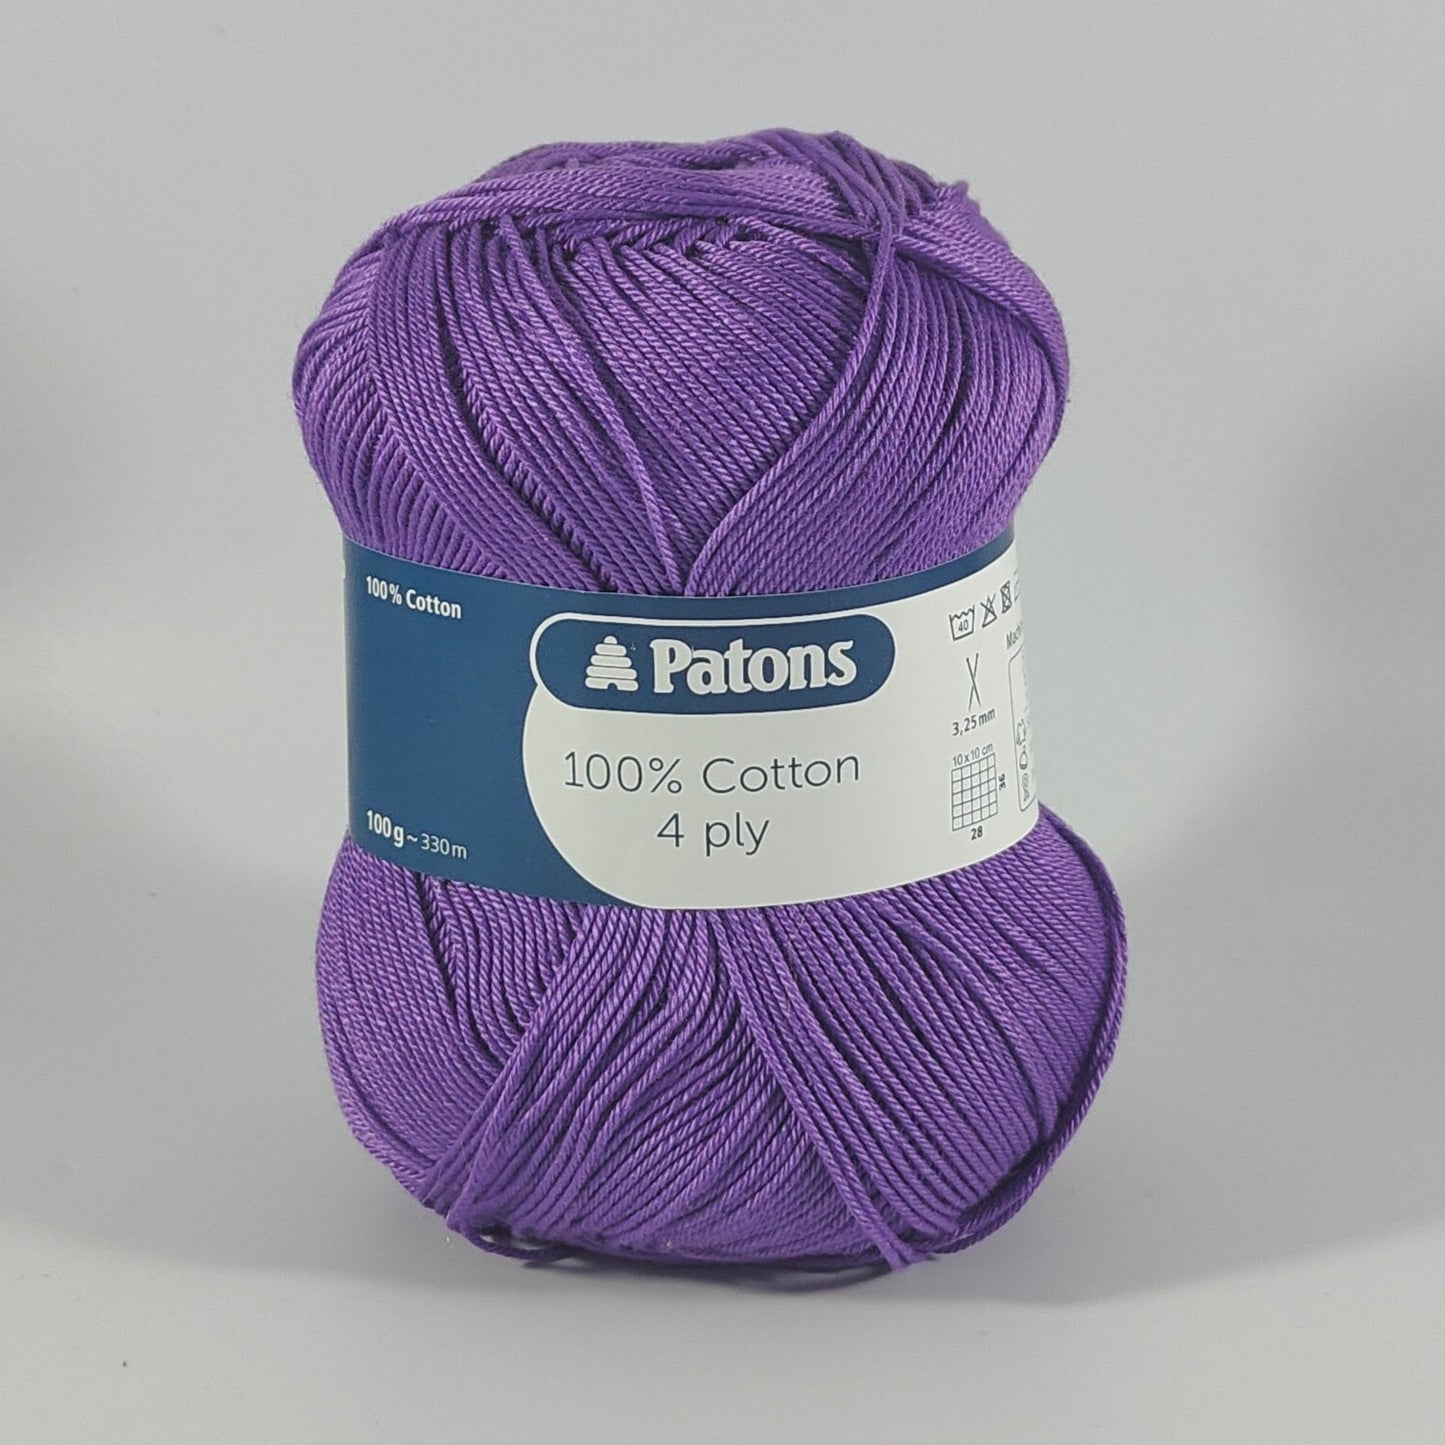 COTTON 4 PLY 100g  - More colours available